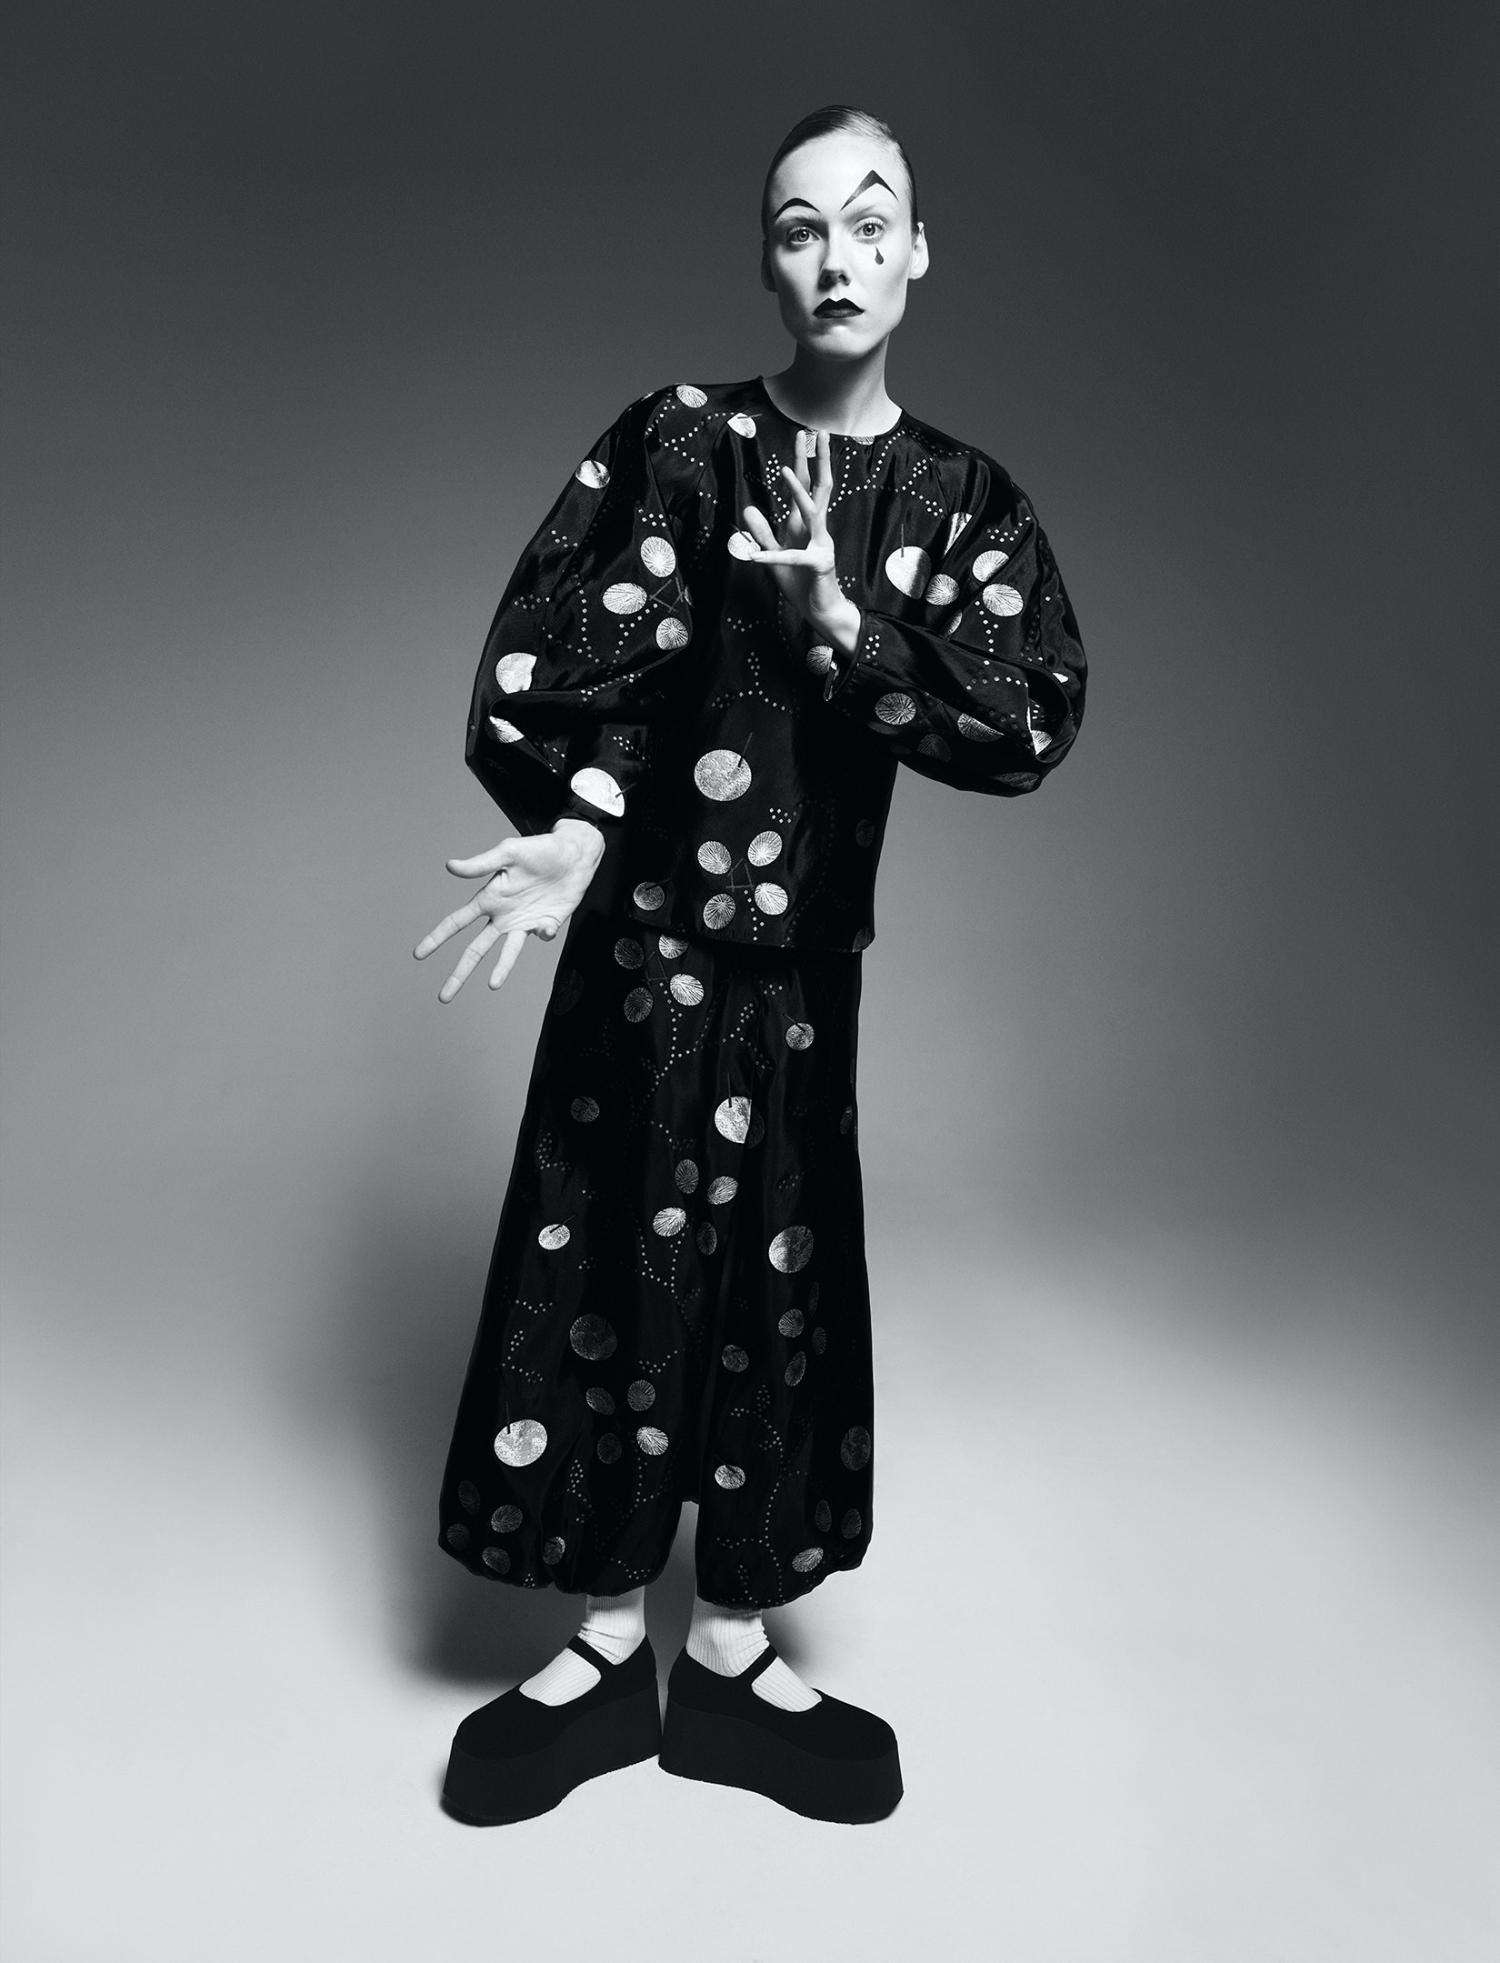 Kiki Willems by Willy Vanderperre for W Magazine Fall 2021